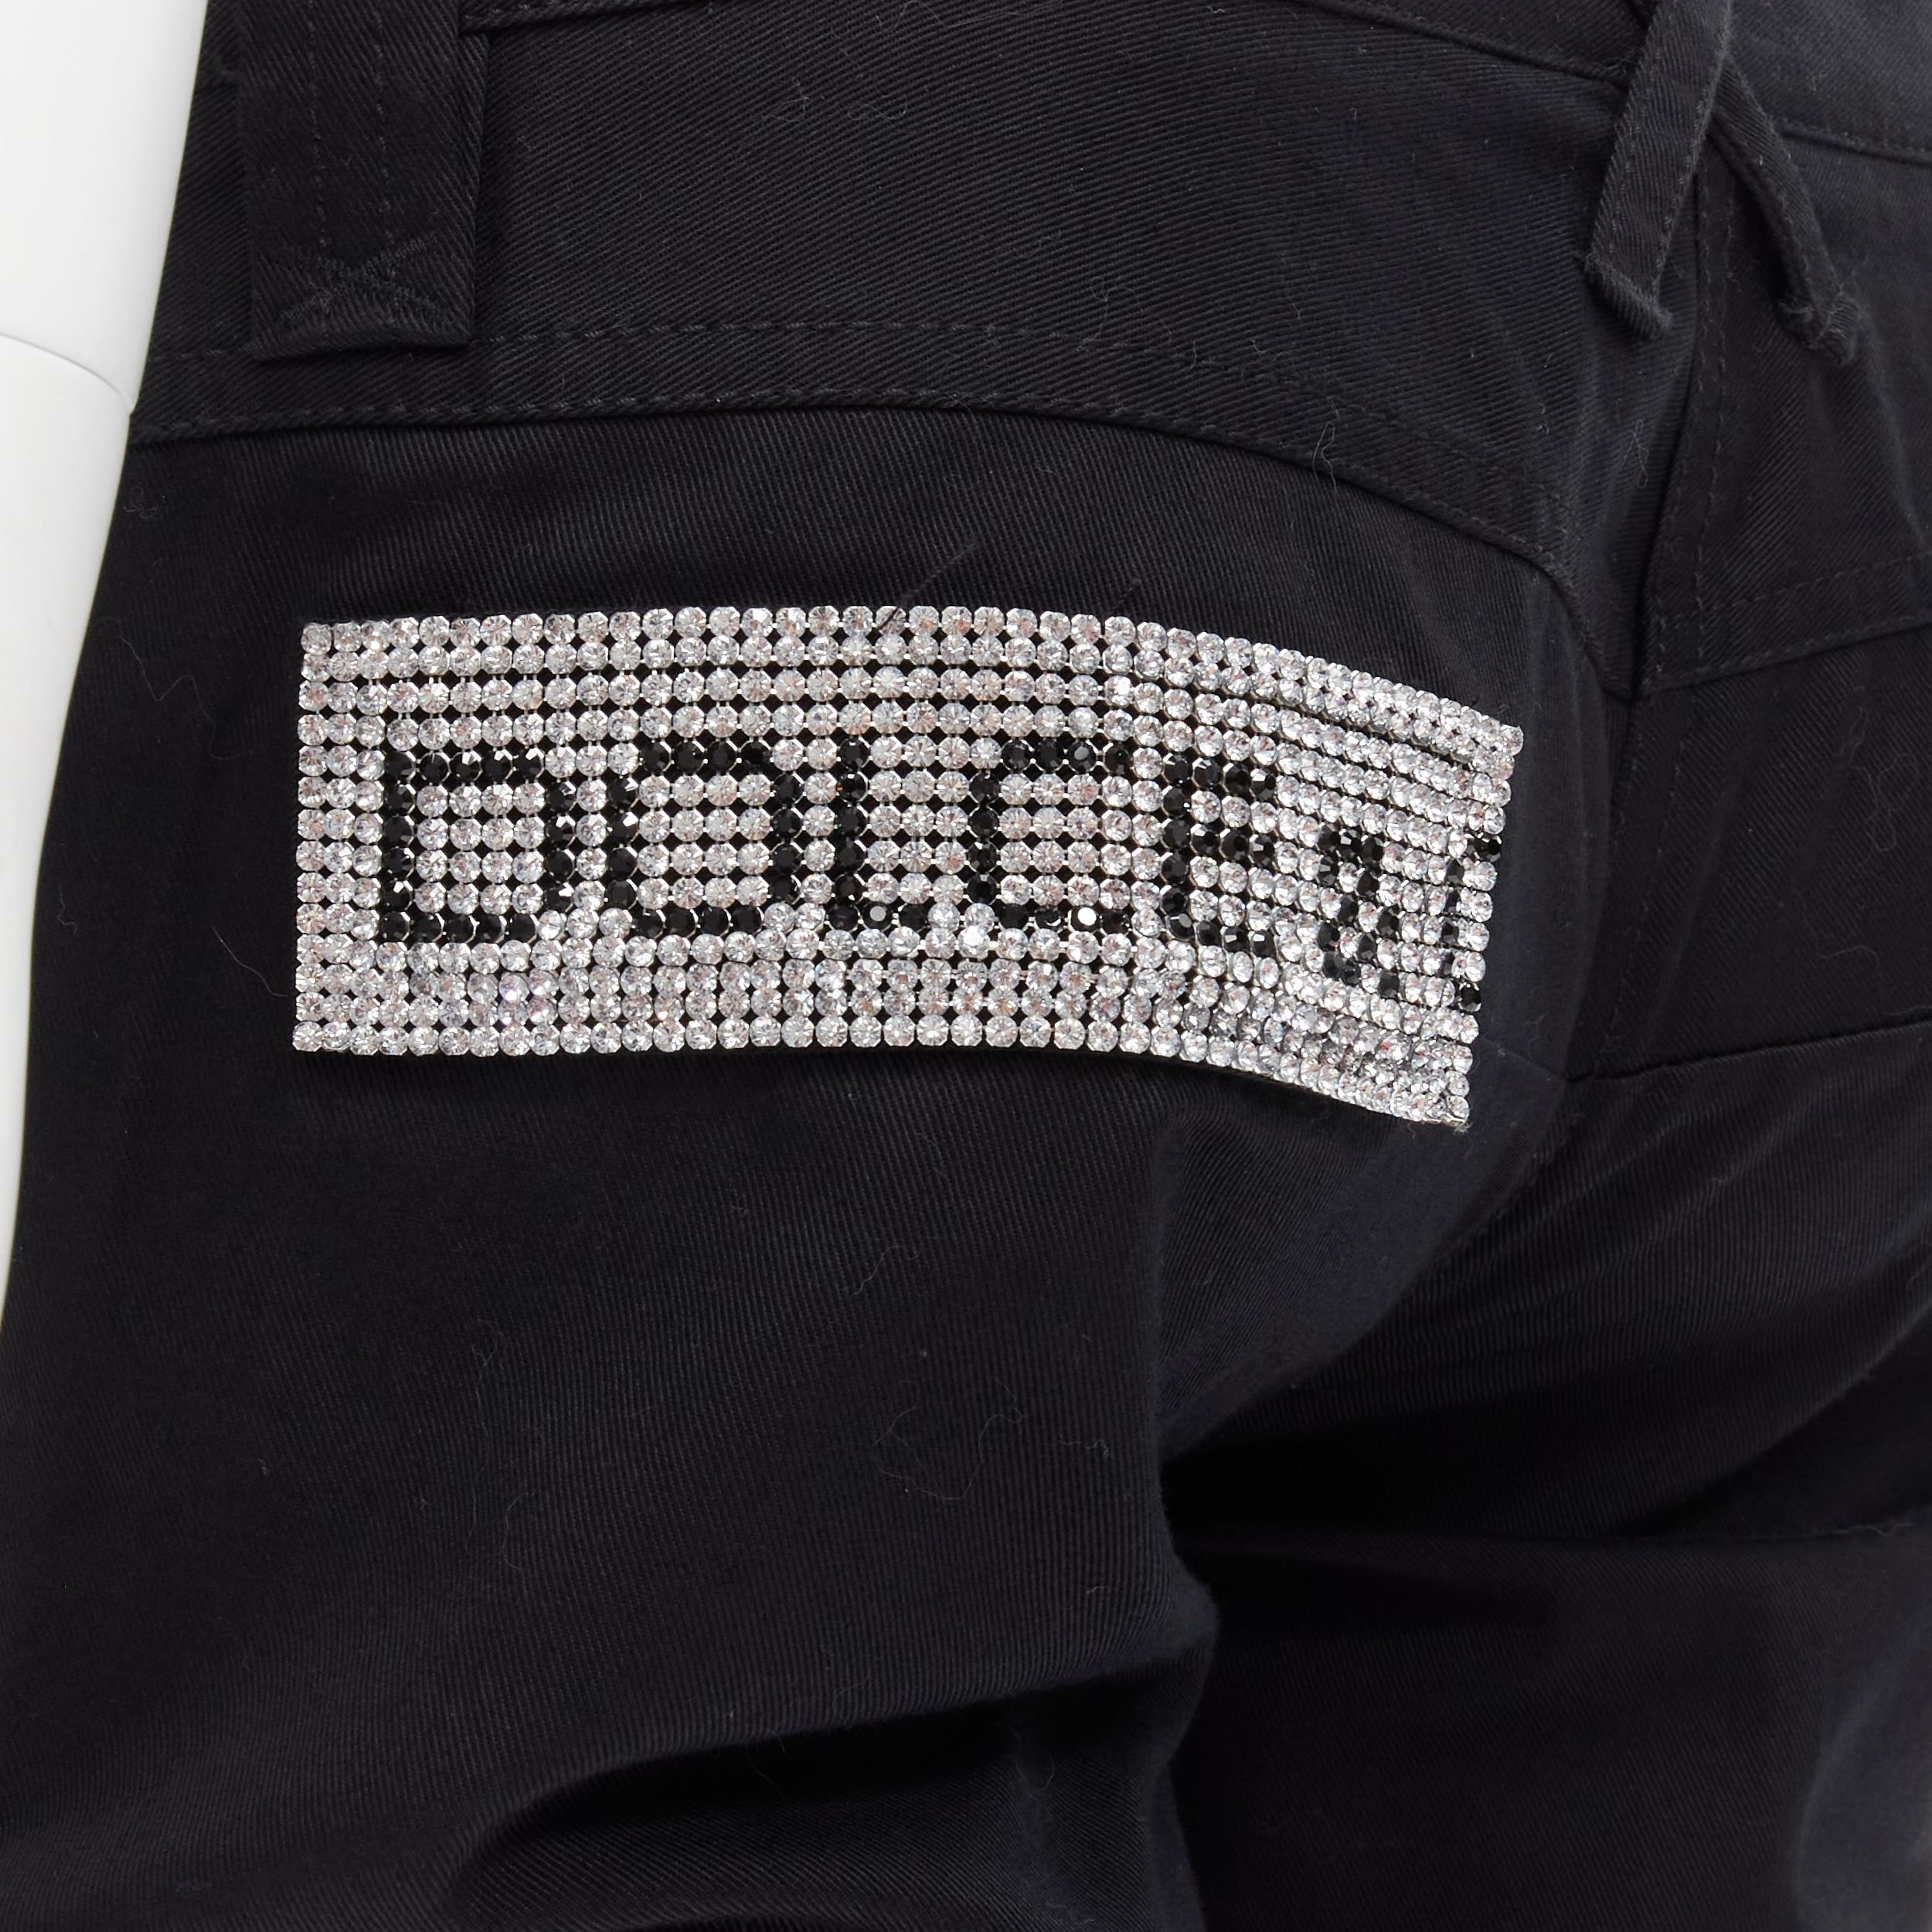 DOLCE GABBANA VIntage Y2K crystal logo flap pocket black cropped pants XS 
Reference: ANWU/A00555 
Brand: Dolce Gabbana 
Material: Feels like cotton 
Color: Black 
Pattern: Solid 
Closure: Zip 
Extra Detail: DOLCE GABBANA logo crystal embellished